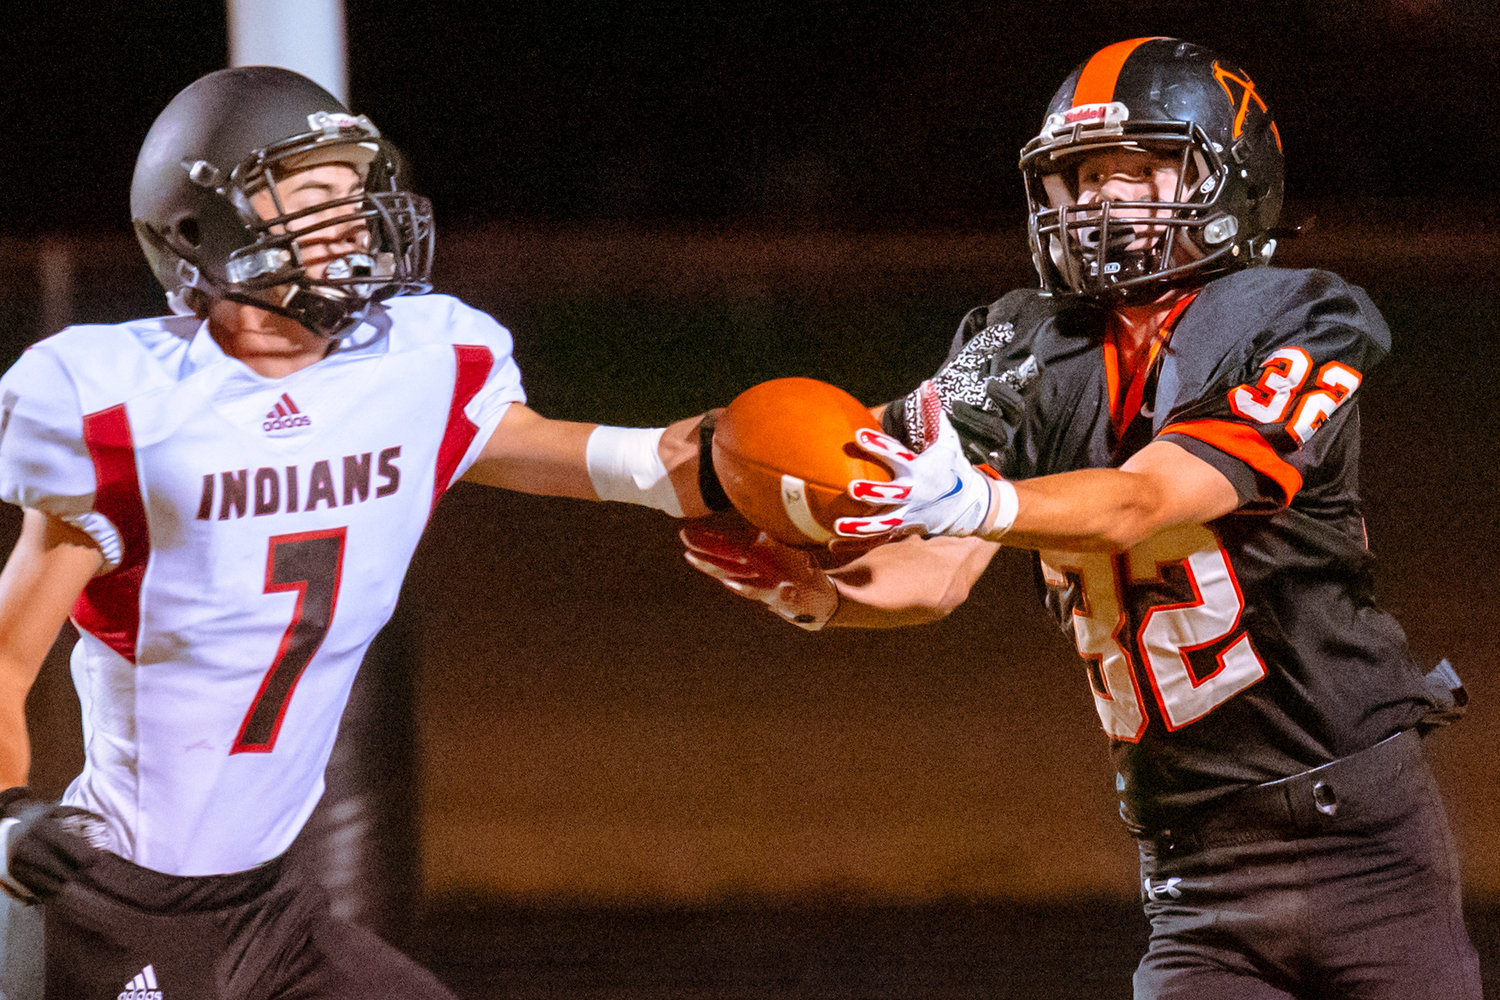 A pass intended for Rainier’s Jake Meldrum (32) is broken up by Toledo’s Aiden Umbriaco (7) under Friday night lights.